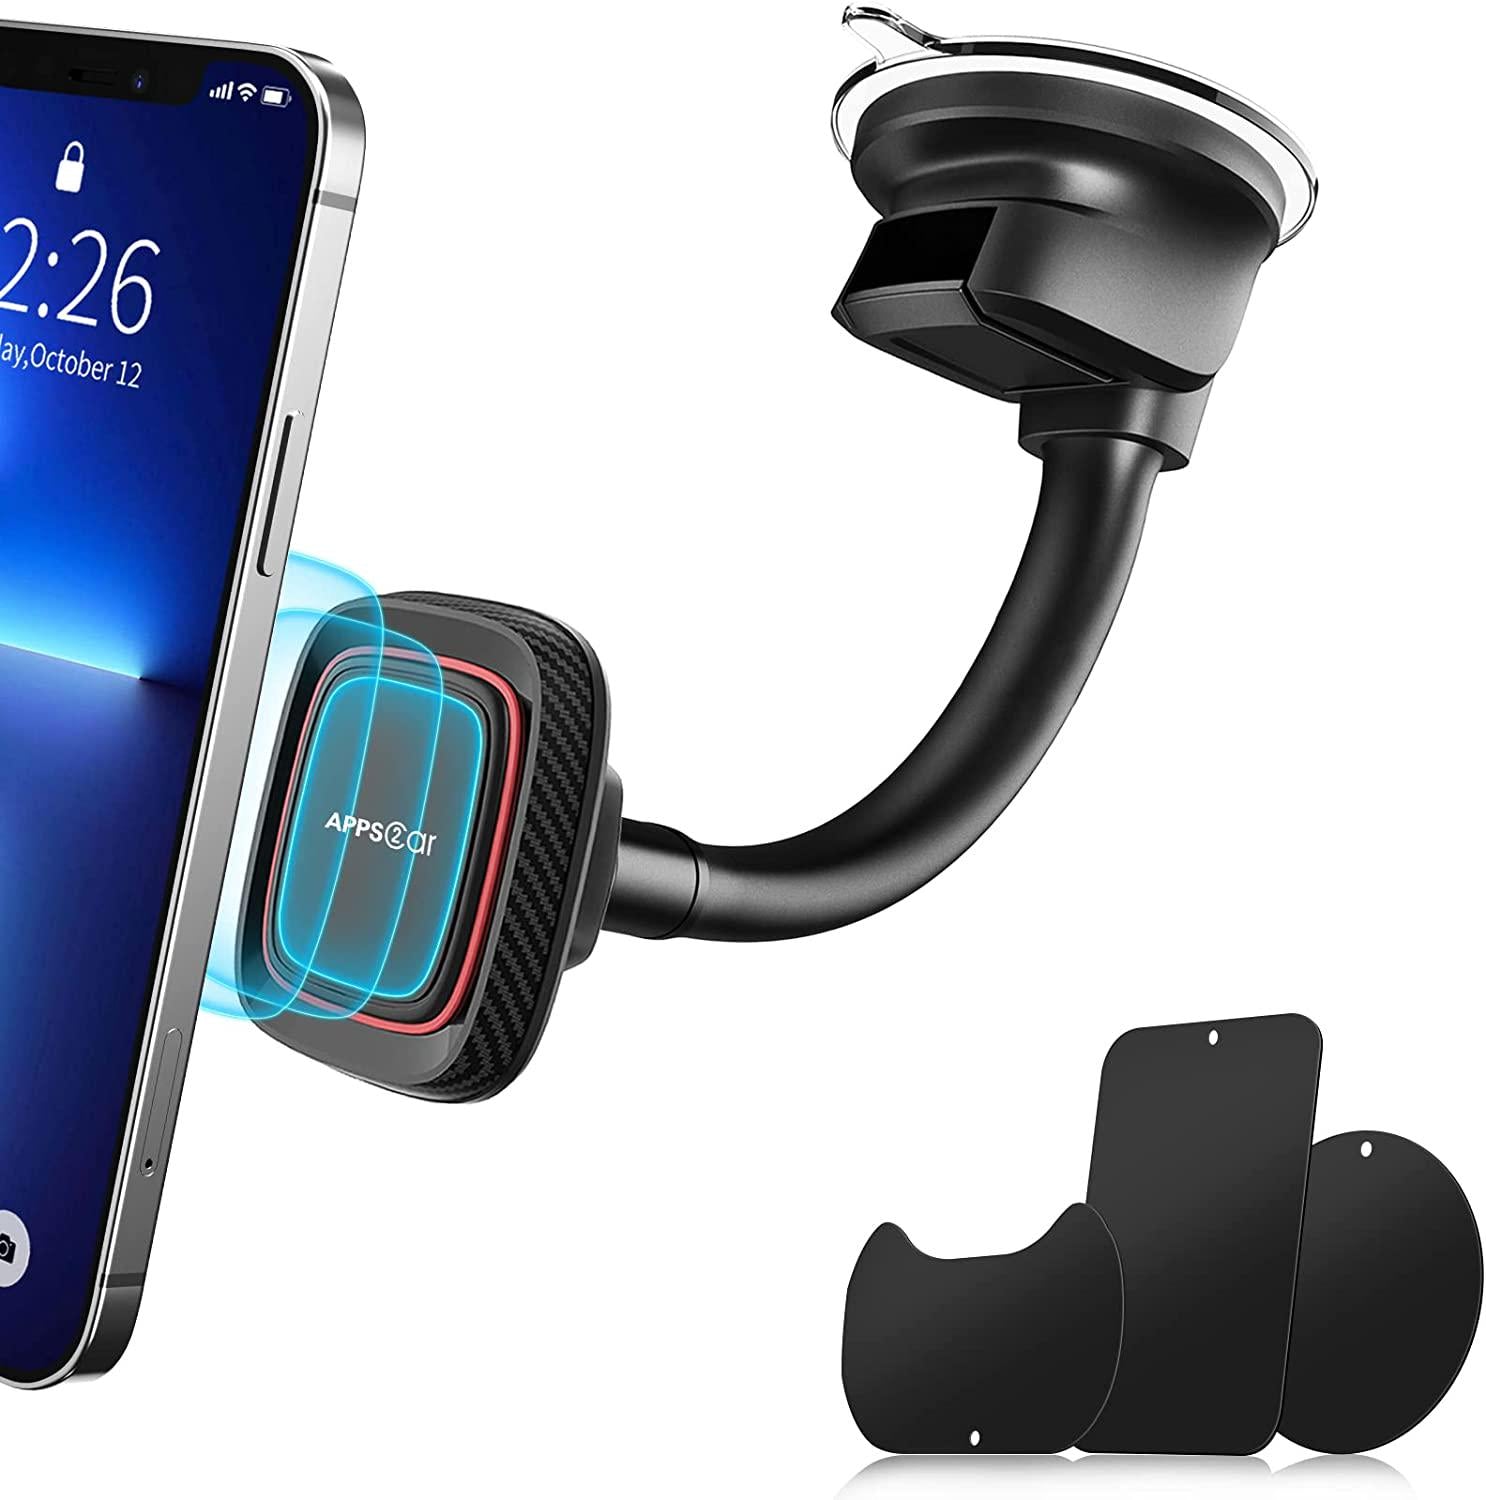 APPS2Car, Magnetic Phone Car Mount, APPS2Car XL Universal Dashboard and Windshield Car Phone Mount with 6 Strong Magnet,Phone Holder for Car with Strong Suction Cup, Com/W Larger and Heavy Devices